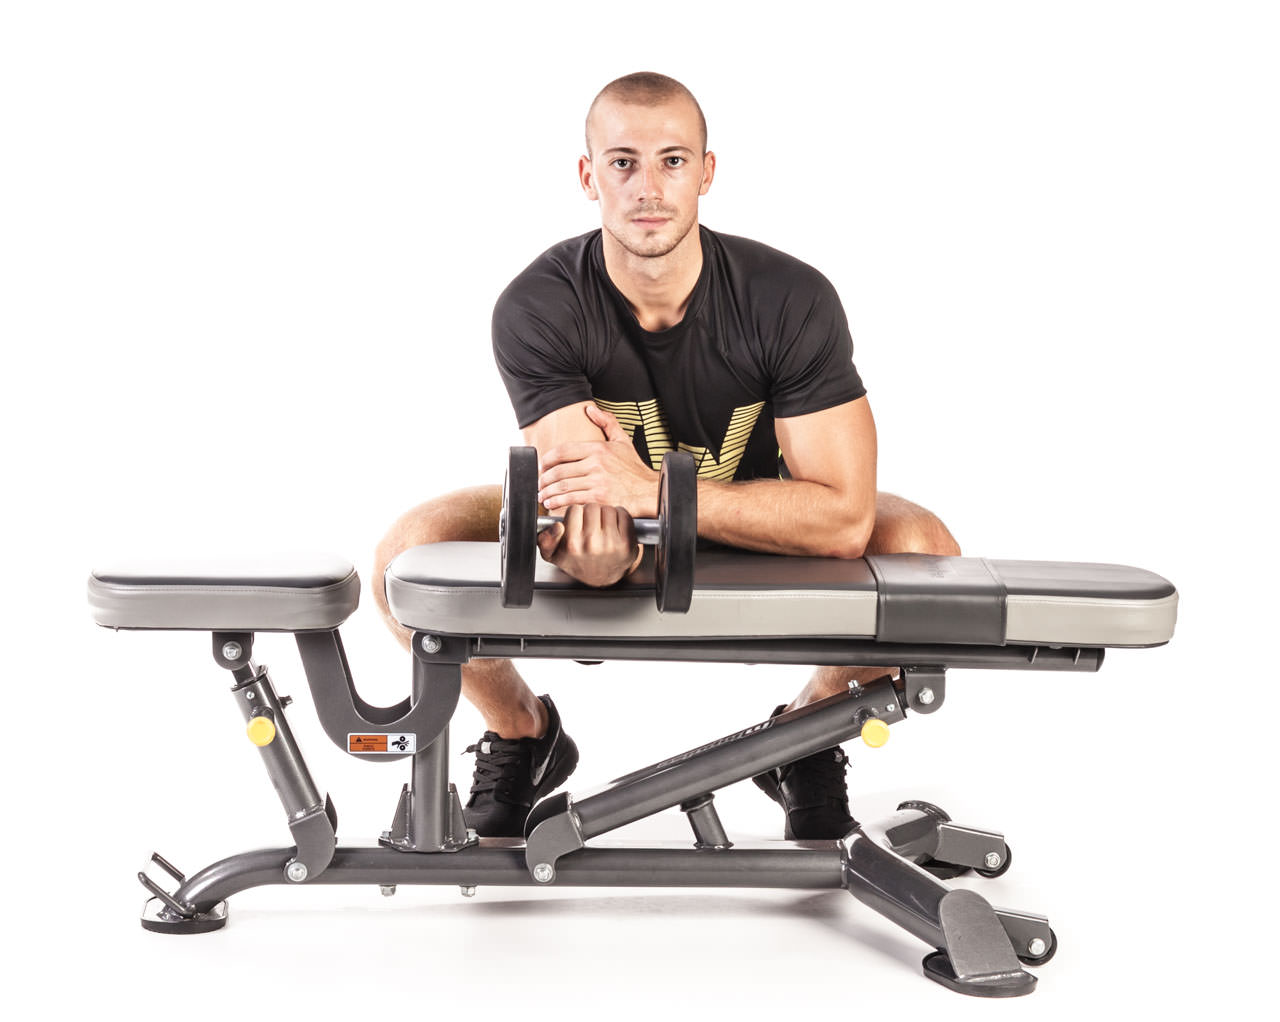 One-Arm Dumbbell Wrist Curl Over a Bench frame #2